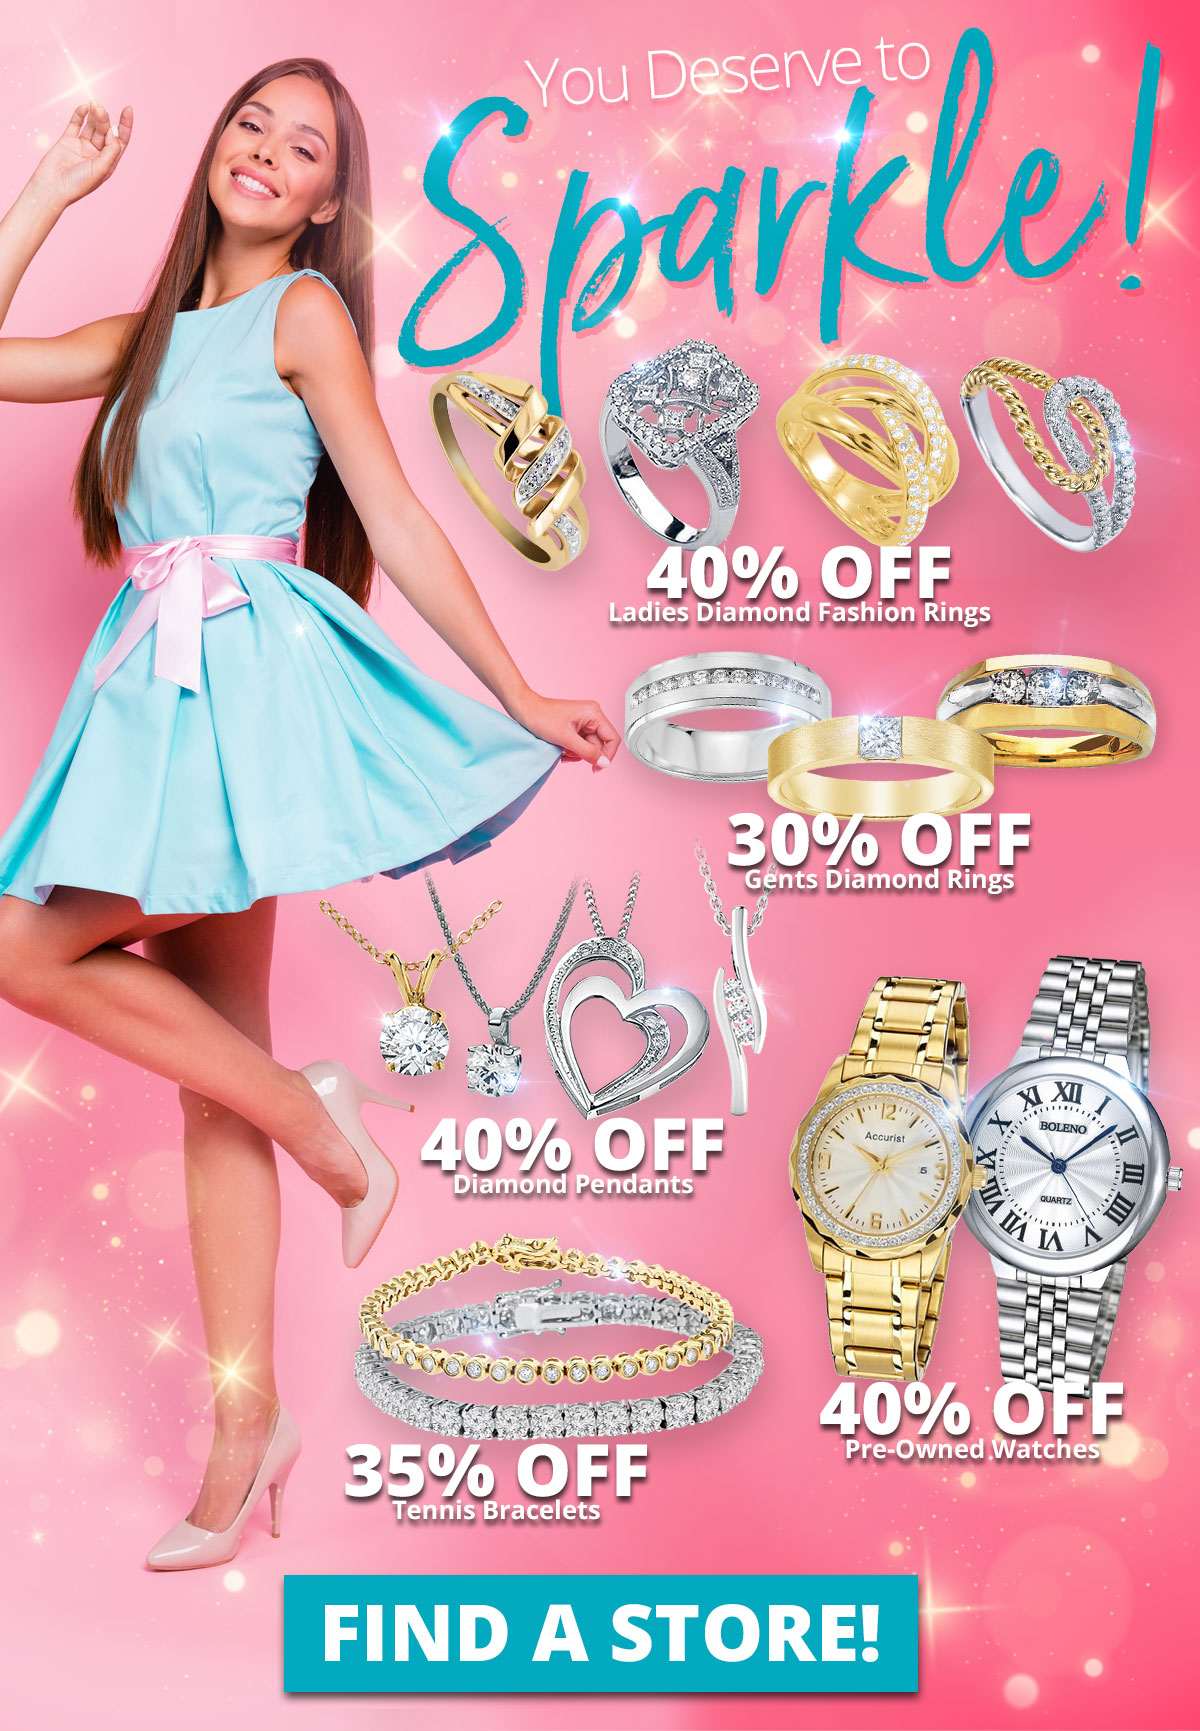 You Deserve to Sparkle! 40% OFF Ladies Diamond Fashion Rings 30% OFF Gents Diamond Rings 40% OFF Diamond Pendants 40% OFF Pre-Owned Watches 35% OFF Tennis Bracelets Sale Runs March 1 - 31, 2023. Layaway discounts must be reduced by 12.5%. Offer cannot be combined with any other offer. Discount not available on previously sold merchandise. Excludes all 3rd party appraised/certified jewelry. Rolex, gold and other high end watches excluded.